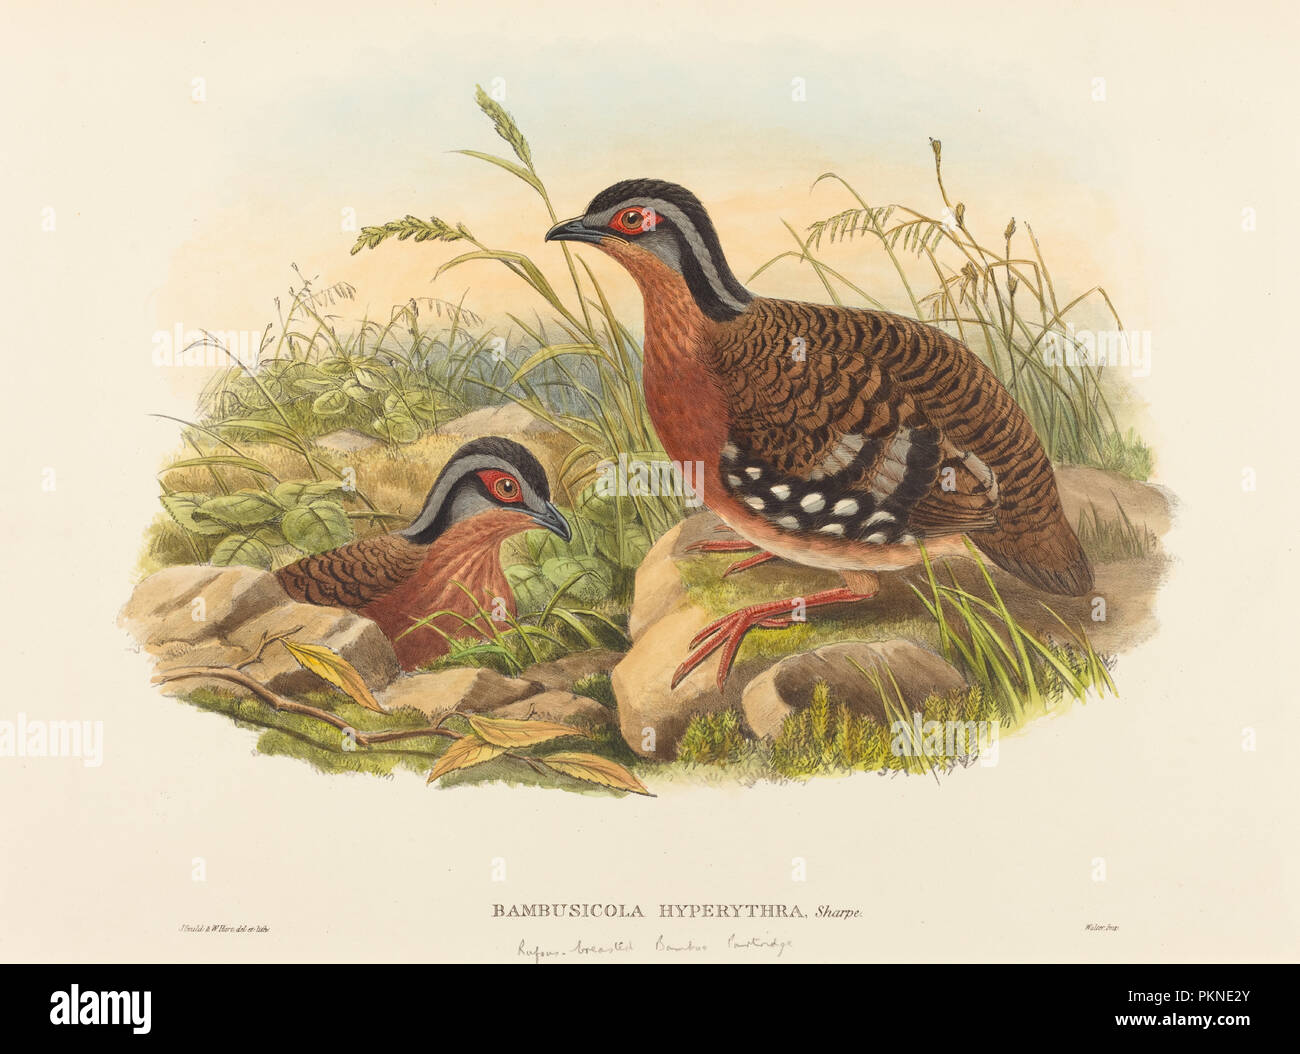 Rufous-breasted Bamboo Partridge (Bambusicola Hyperythra). Dimensions: sheet: 38.6 x 56 cm (15 3/16 x 22 1/16 in.). Medium: hand-colored lithograph on wove paper. Museum: National Gallery of Art, Washington DC. Author: John Gould and W. Hart. Stock Photo